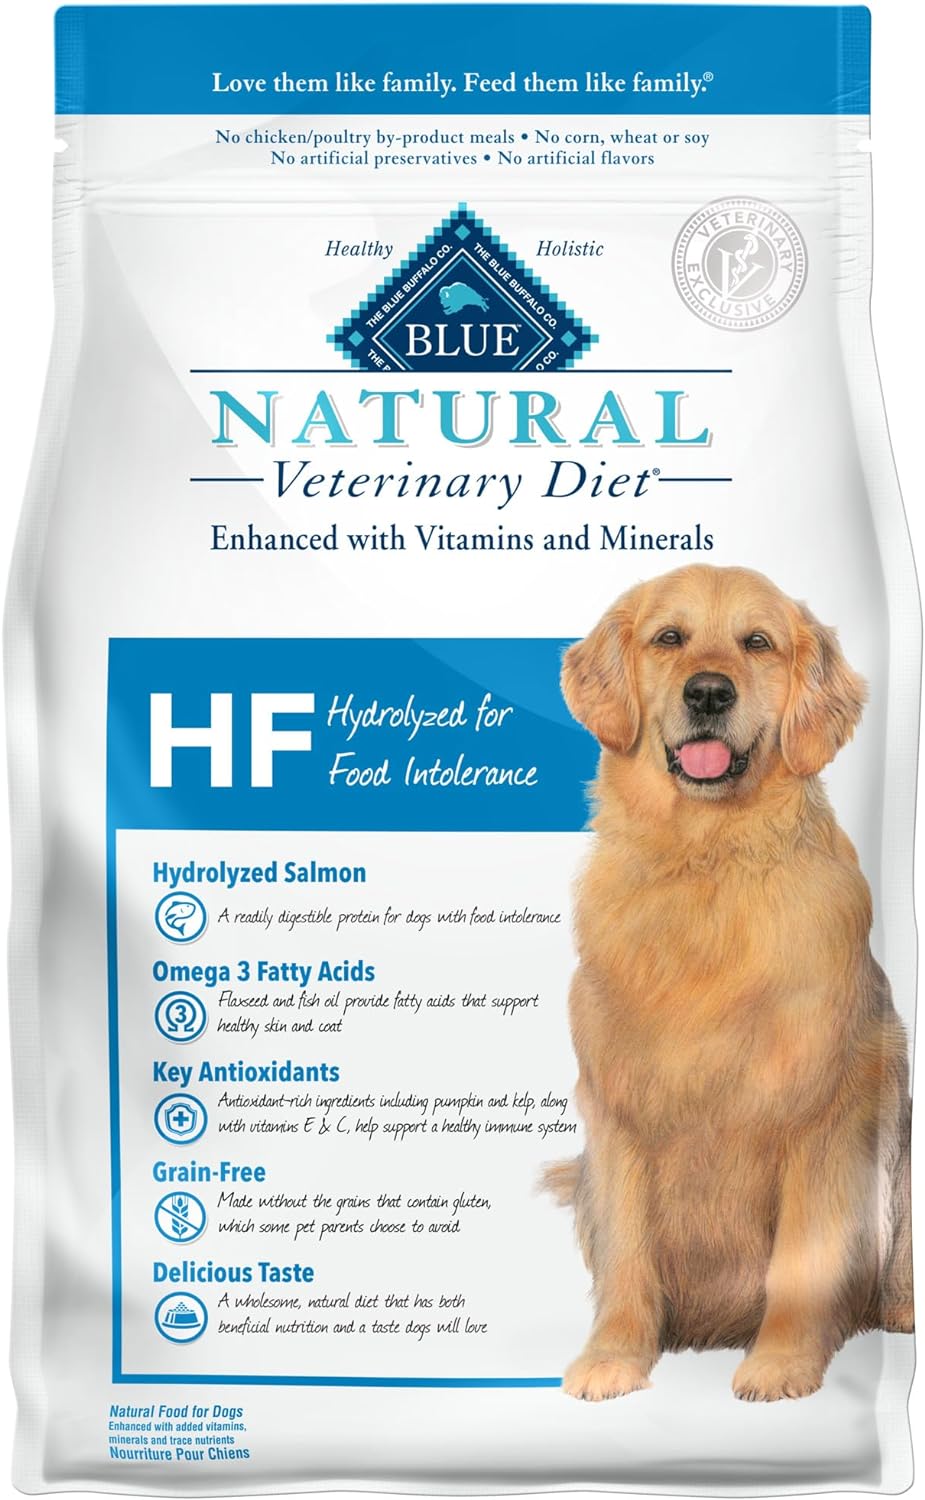 Blue Natural Veterinary Diet HF Hydrolyzed for Food Intolerance Dry Dog Food – Gallery Image 1